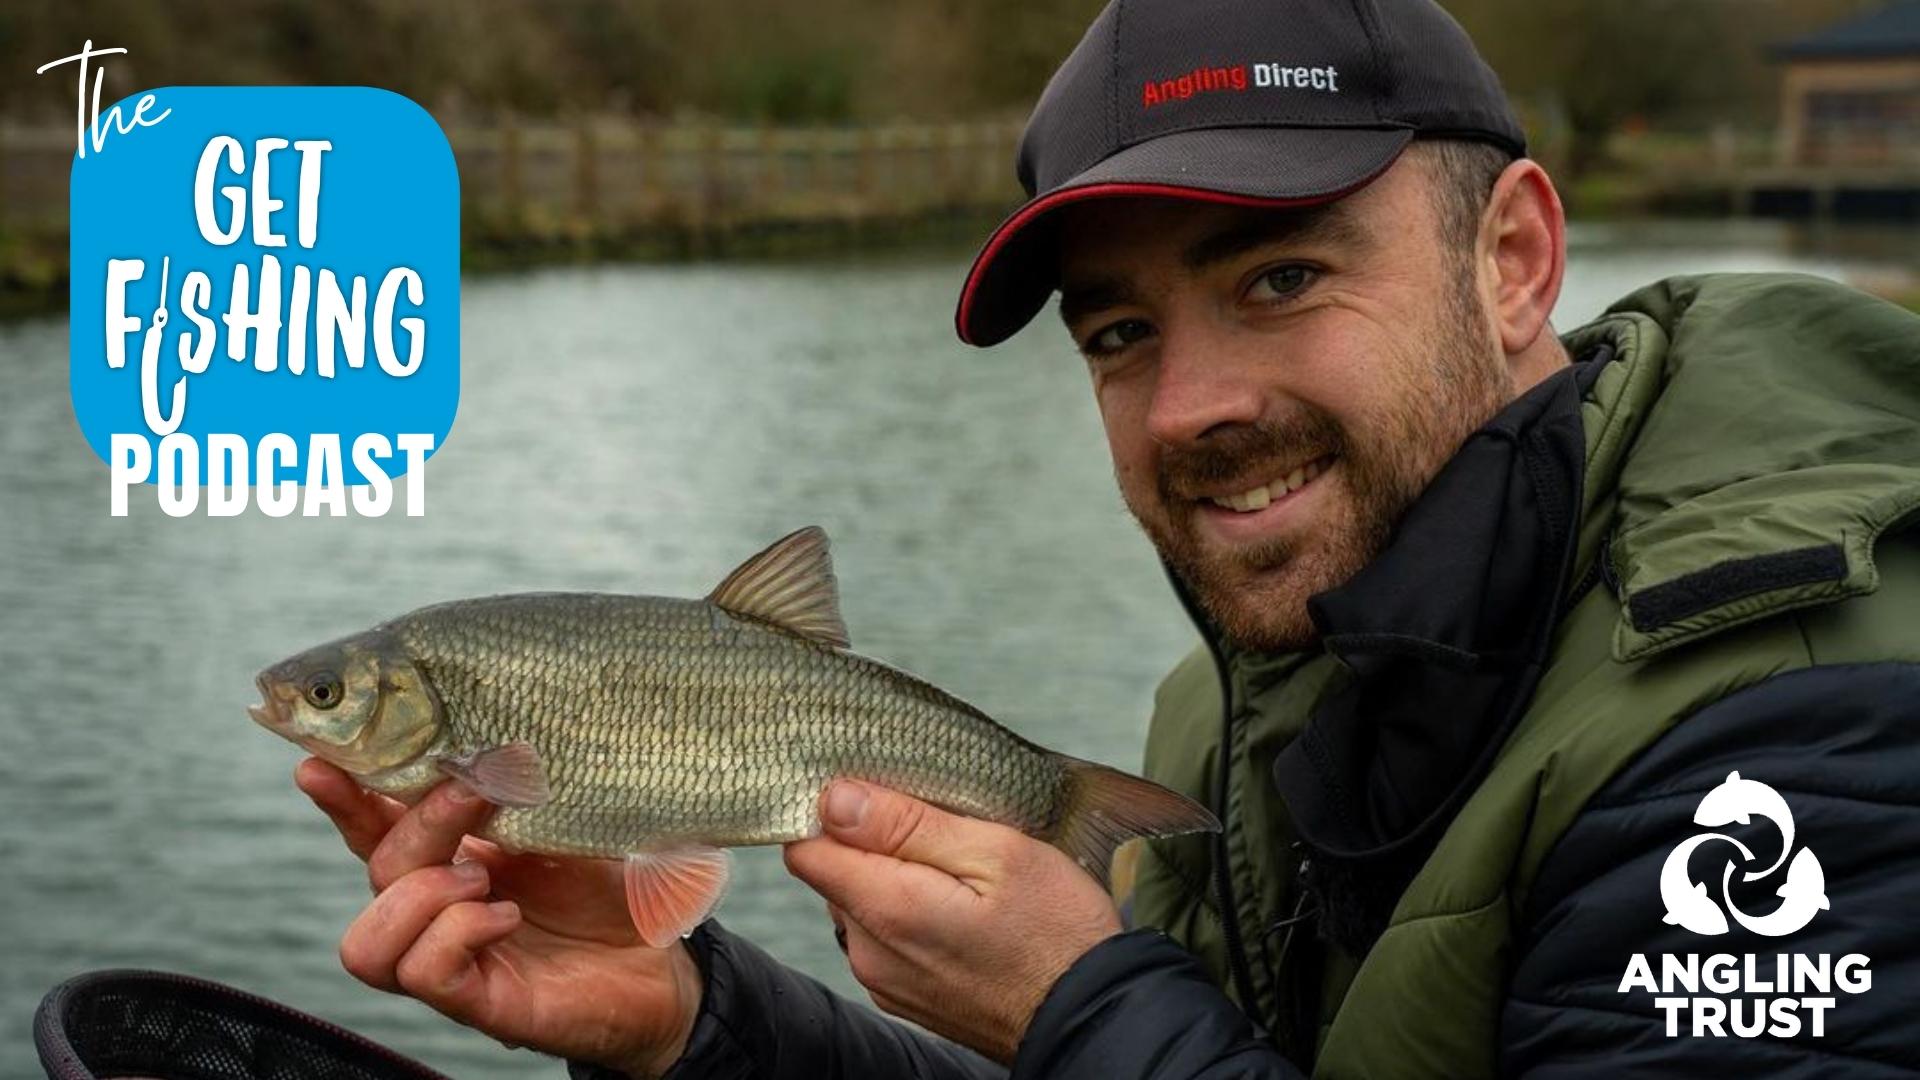 Get Fishing | Stephen Crowe - EP. 9 - The Get Fishing Podcast with Jimmy Willis